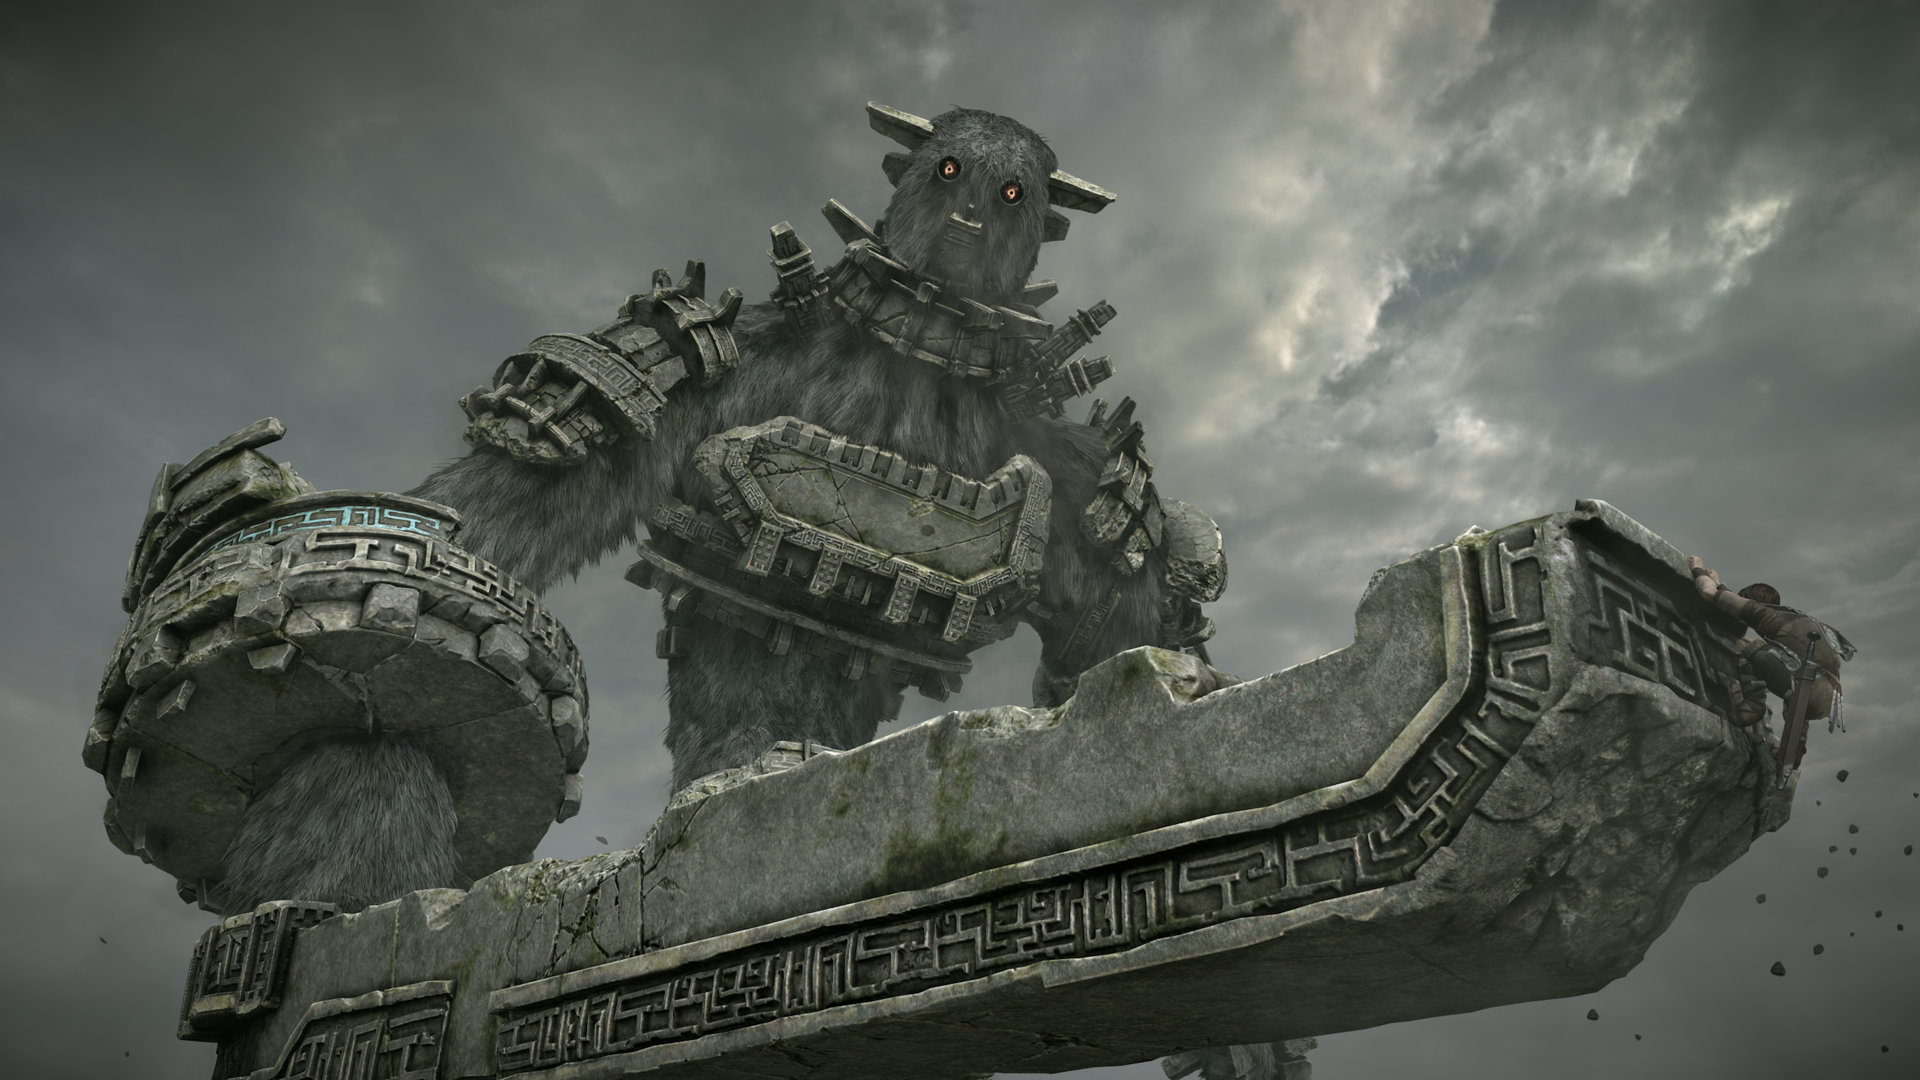 Shadow of the Colossus PS4 Remake Uses PS2 Game Code